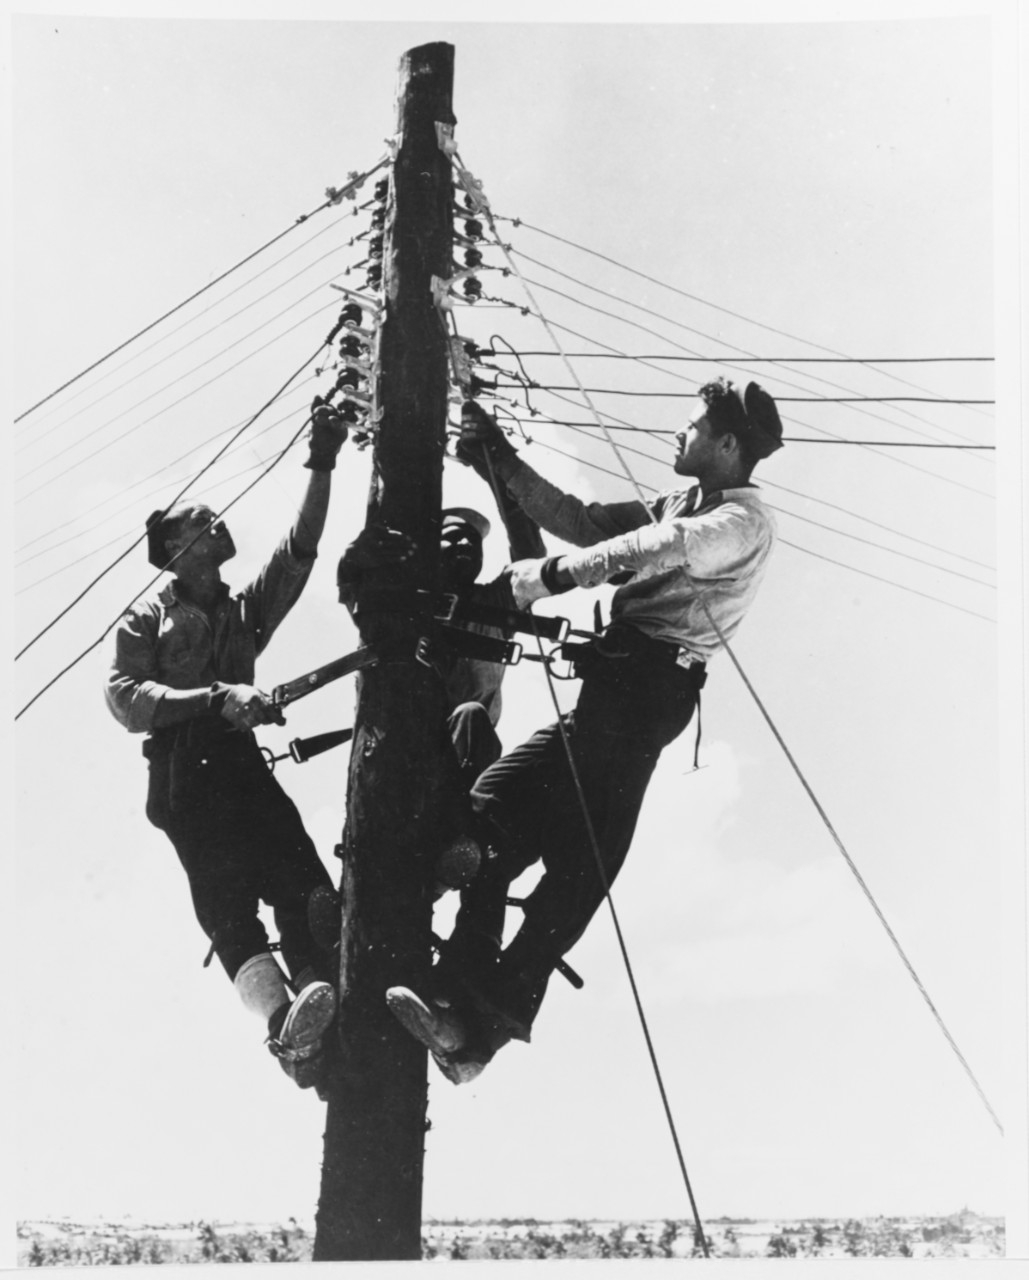 Stringing Electrical Wires at a Navy Supply Depot, Guam